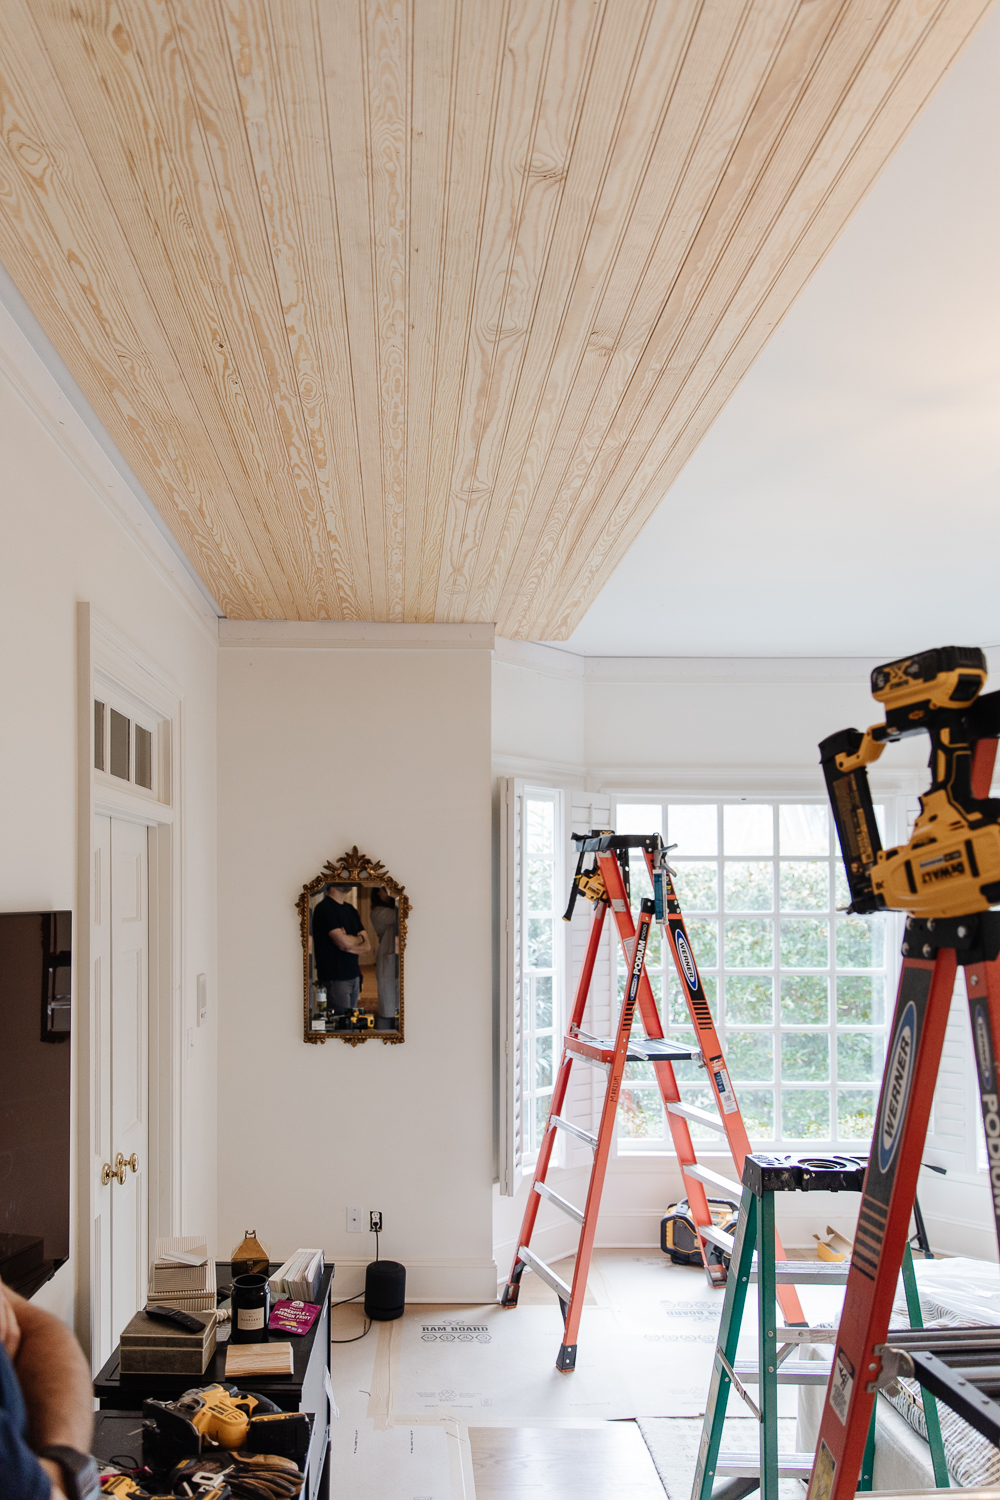 How to Install a Beadboard Ceiling ⋆ A Girl's Guide to Home DIY